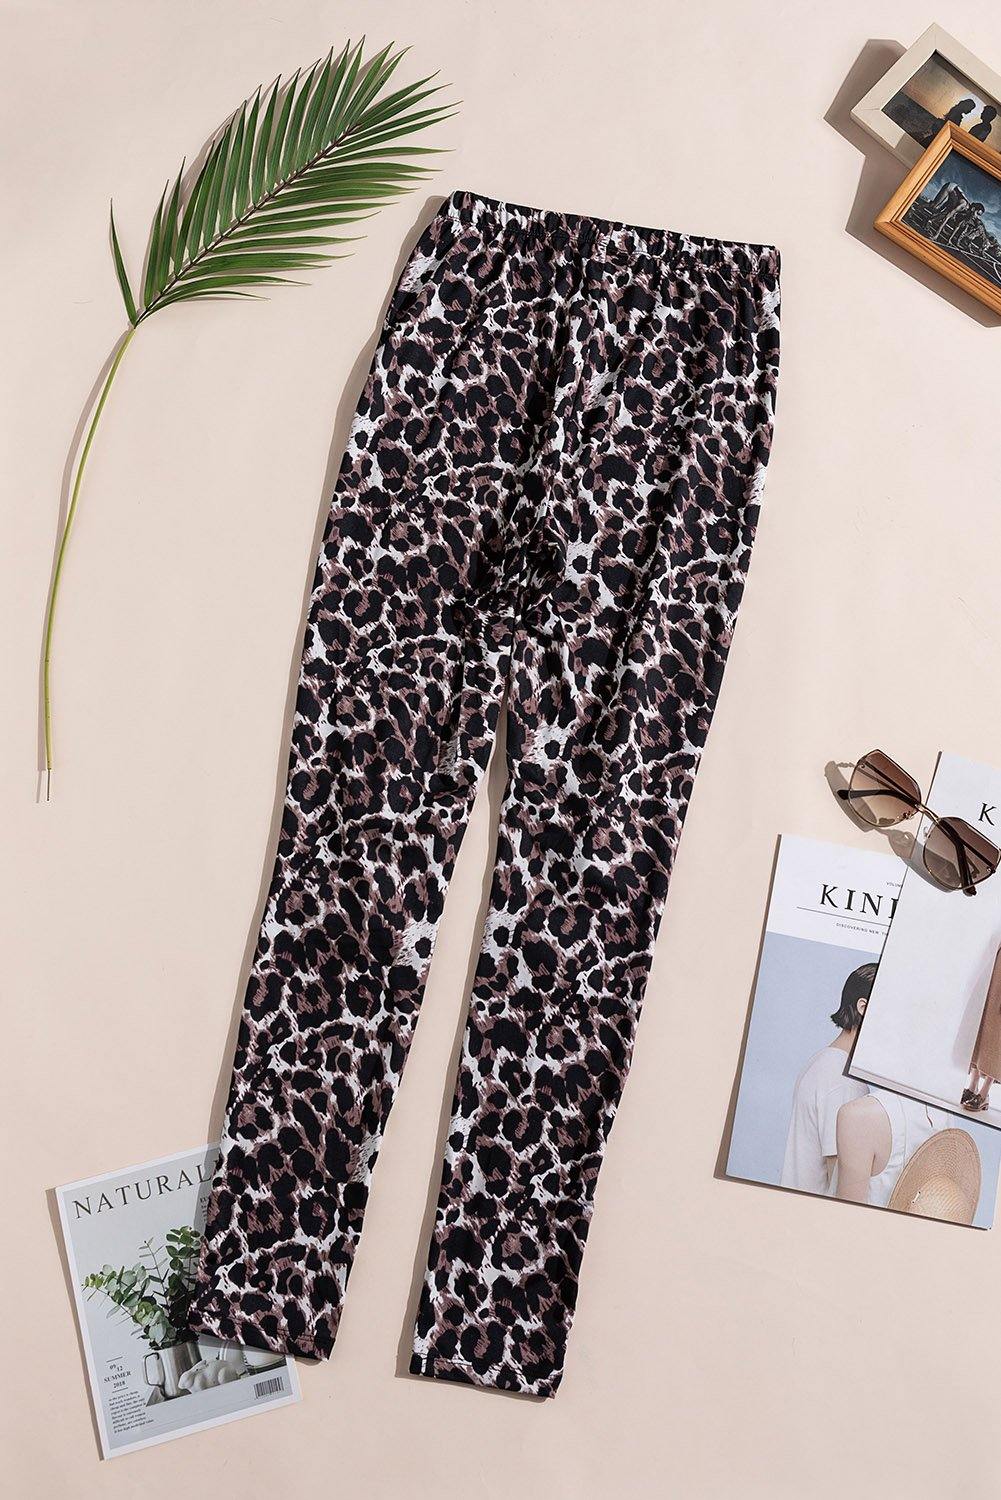 Floral Hollow Out Leopard Printed Skinny Leggings - L & M Kee, LLC